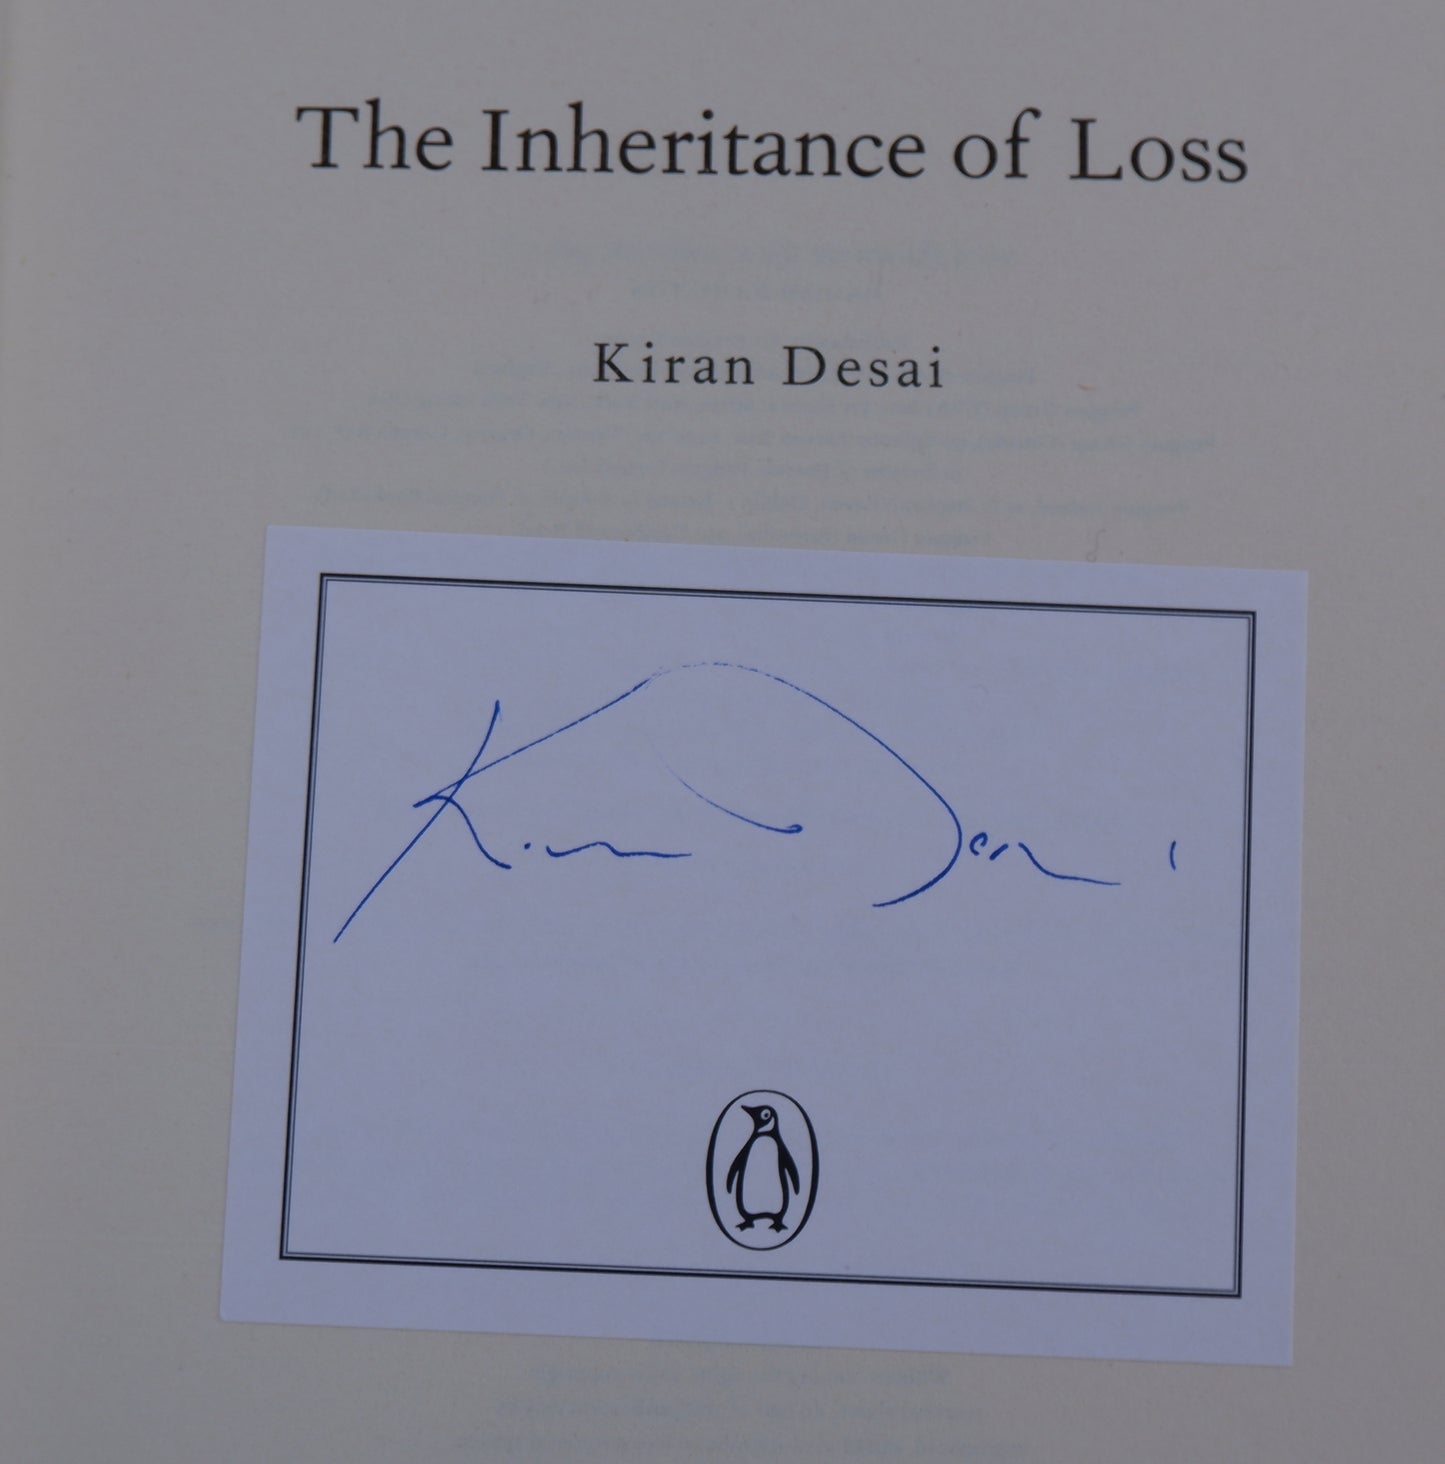 The Inheritance of Loss - Kiran Desai - Signed on Penguin plate, hardback in excellent condition including dust jacket, published in the UK 2006, 7th impression